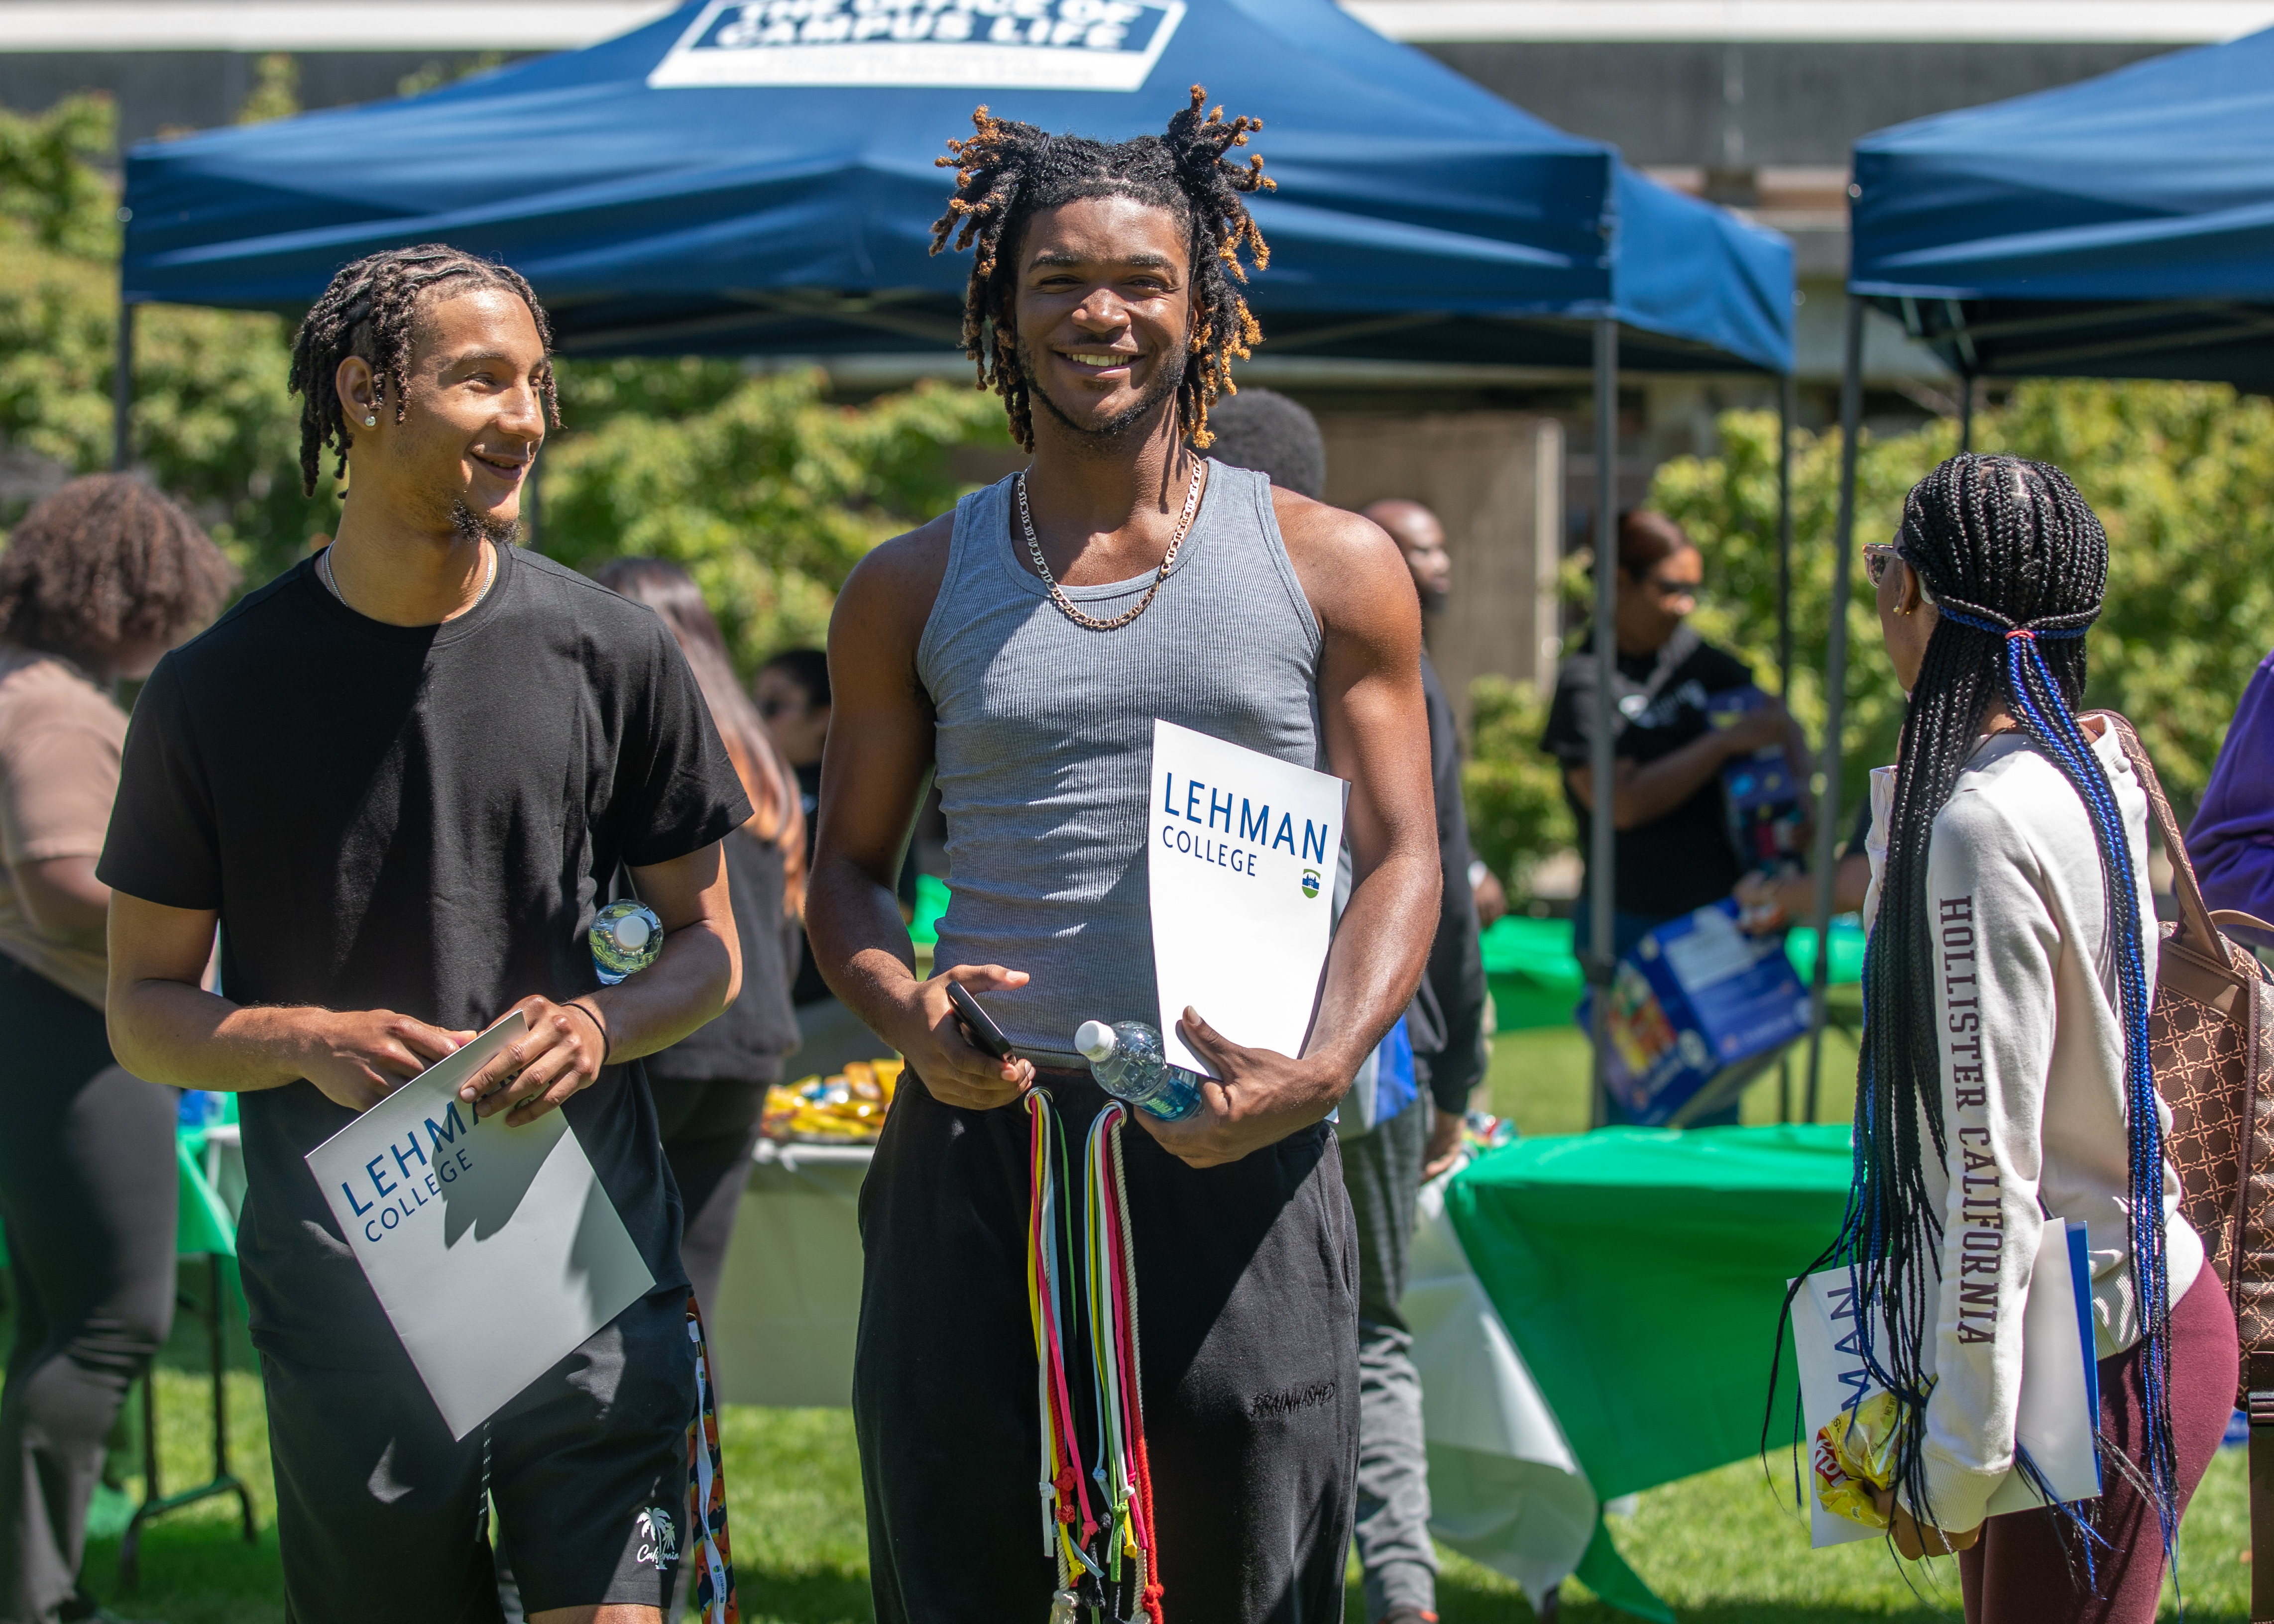 Two men of color standing and smiling at an outdoor event. Both are holding Lehman College folders.